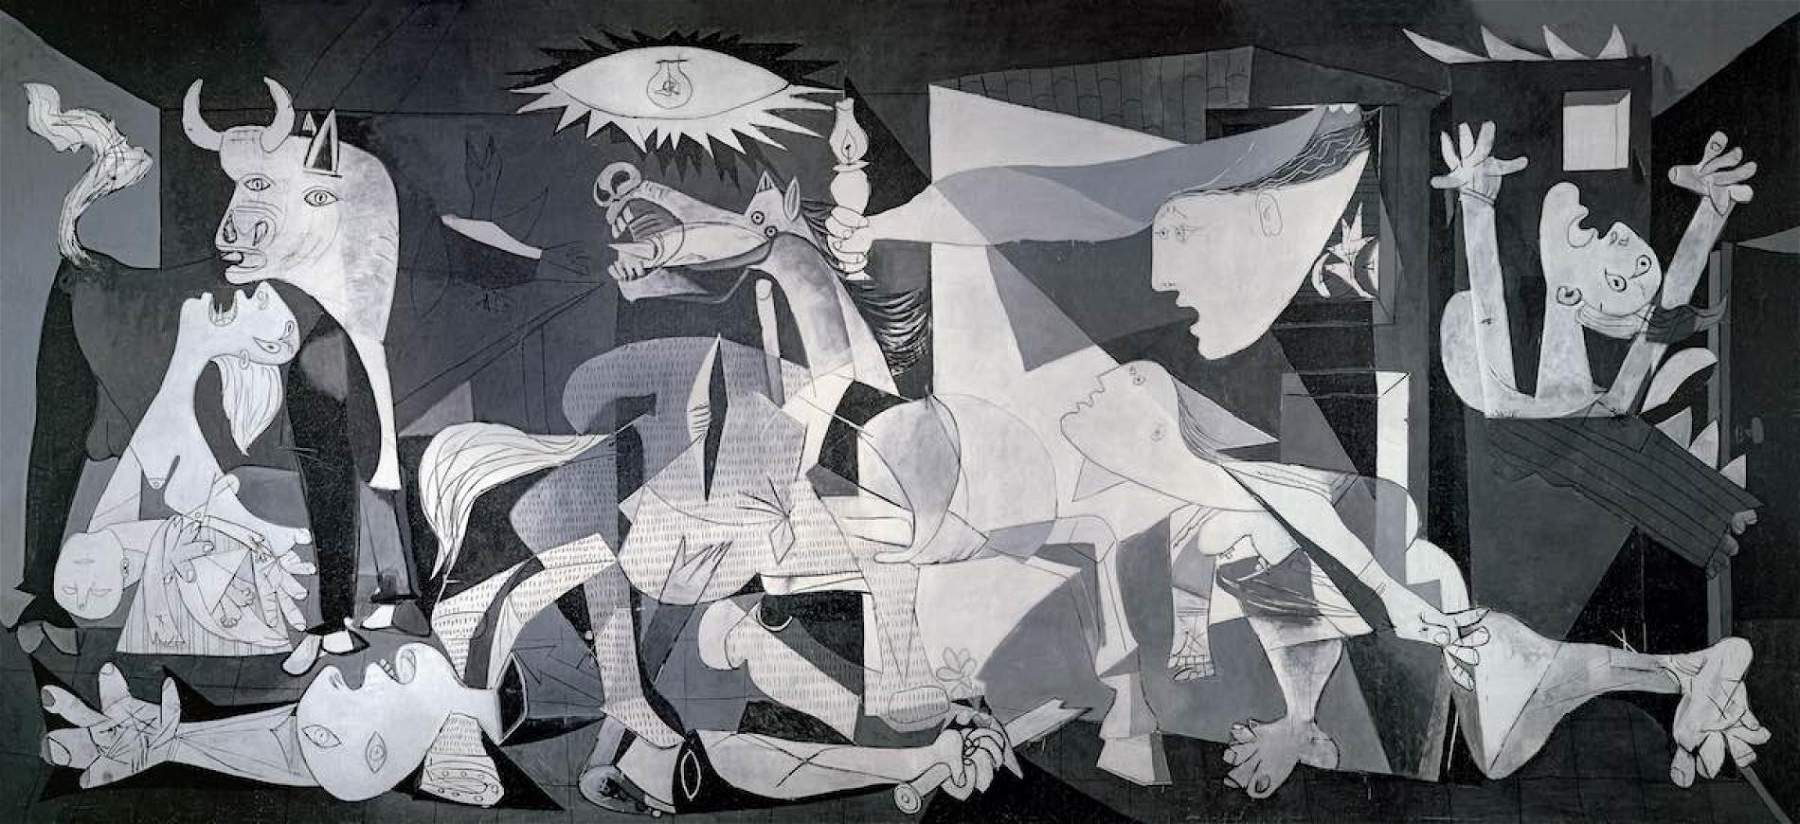 Pablo Picasso: cubism, life and works 